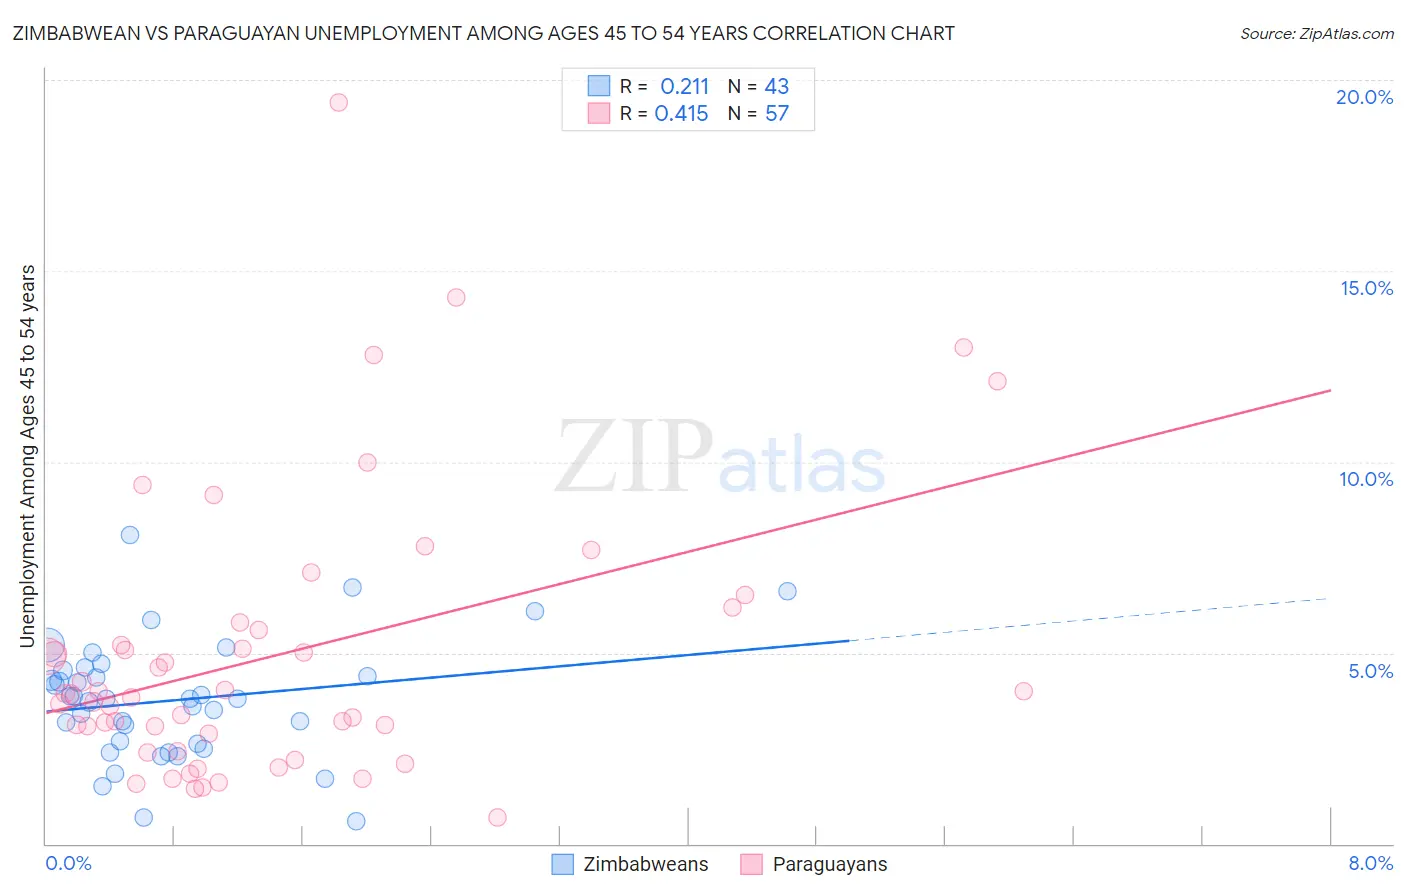 Zimbabwean vs Paraguayan Unemployment Among Ages 45 to 54 years